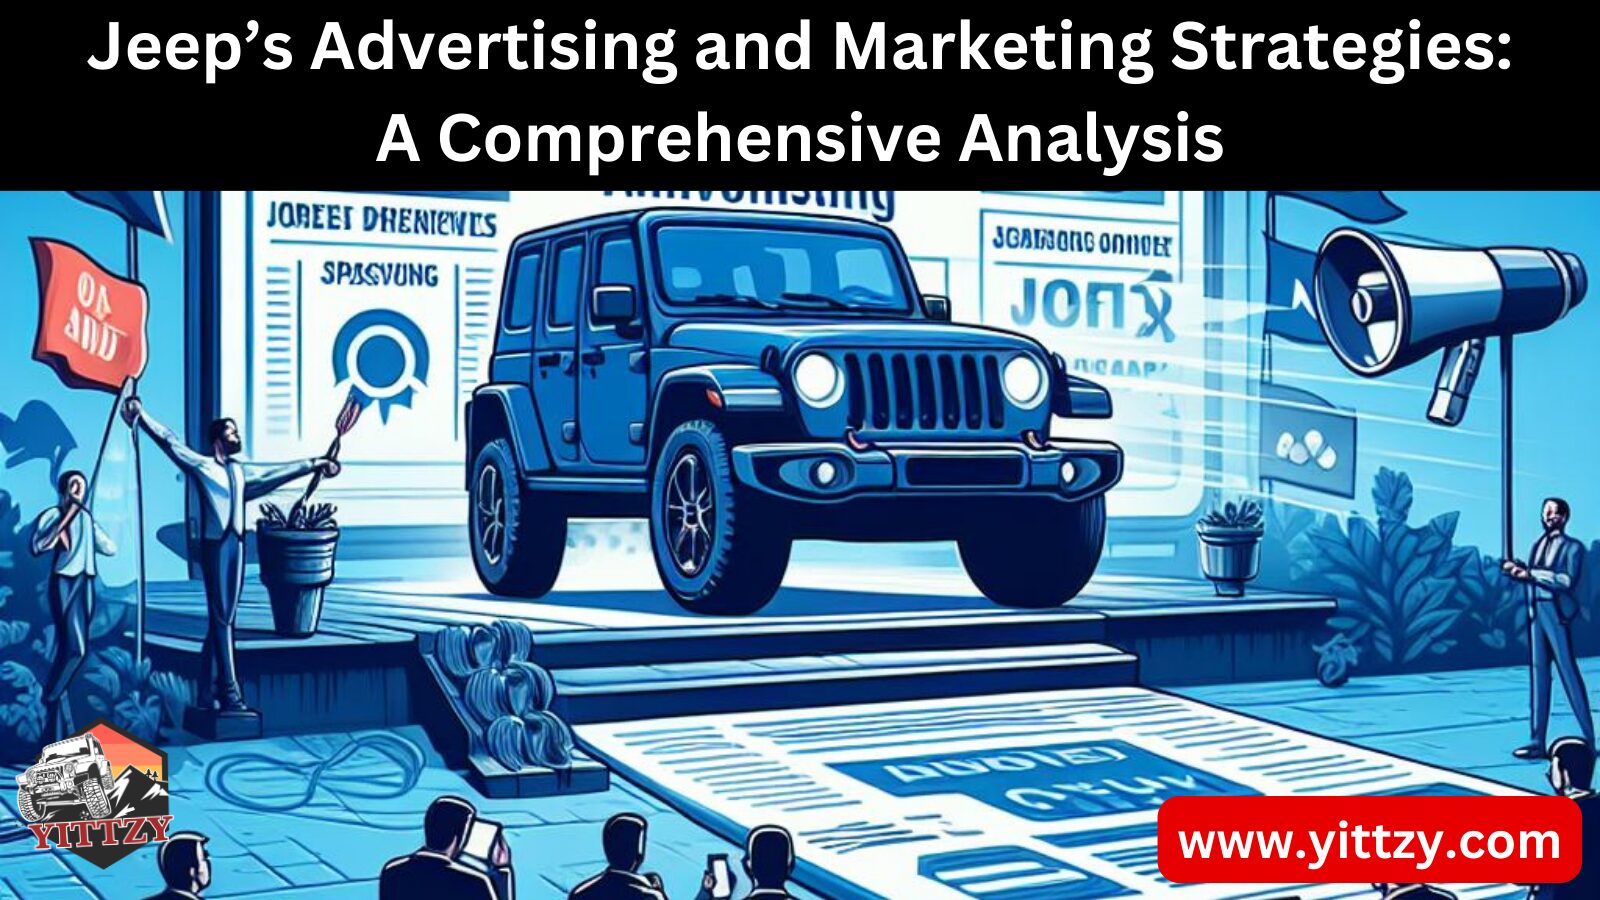 Jeep’s Advertising and Marketing Strategies: A Comprehensive Analysis